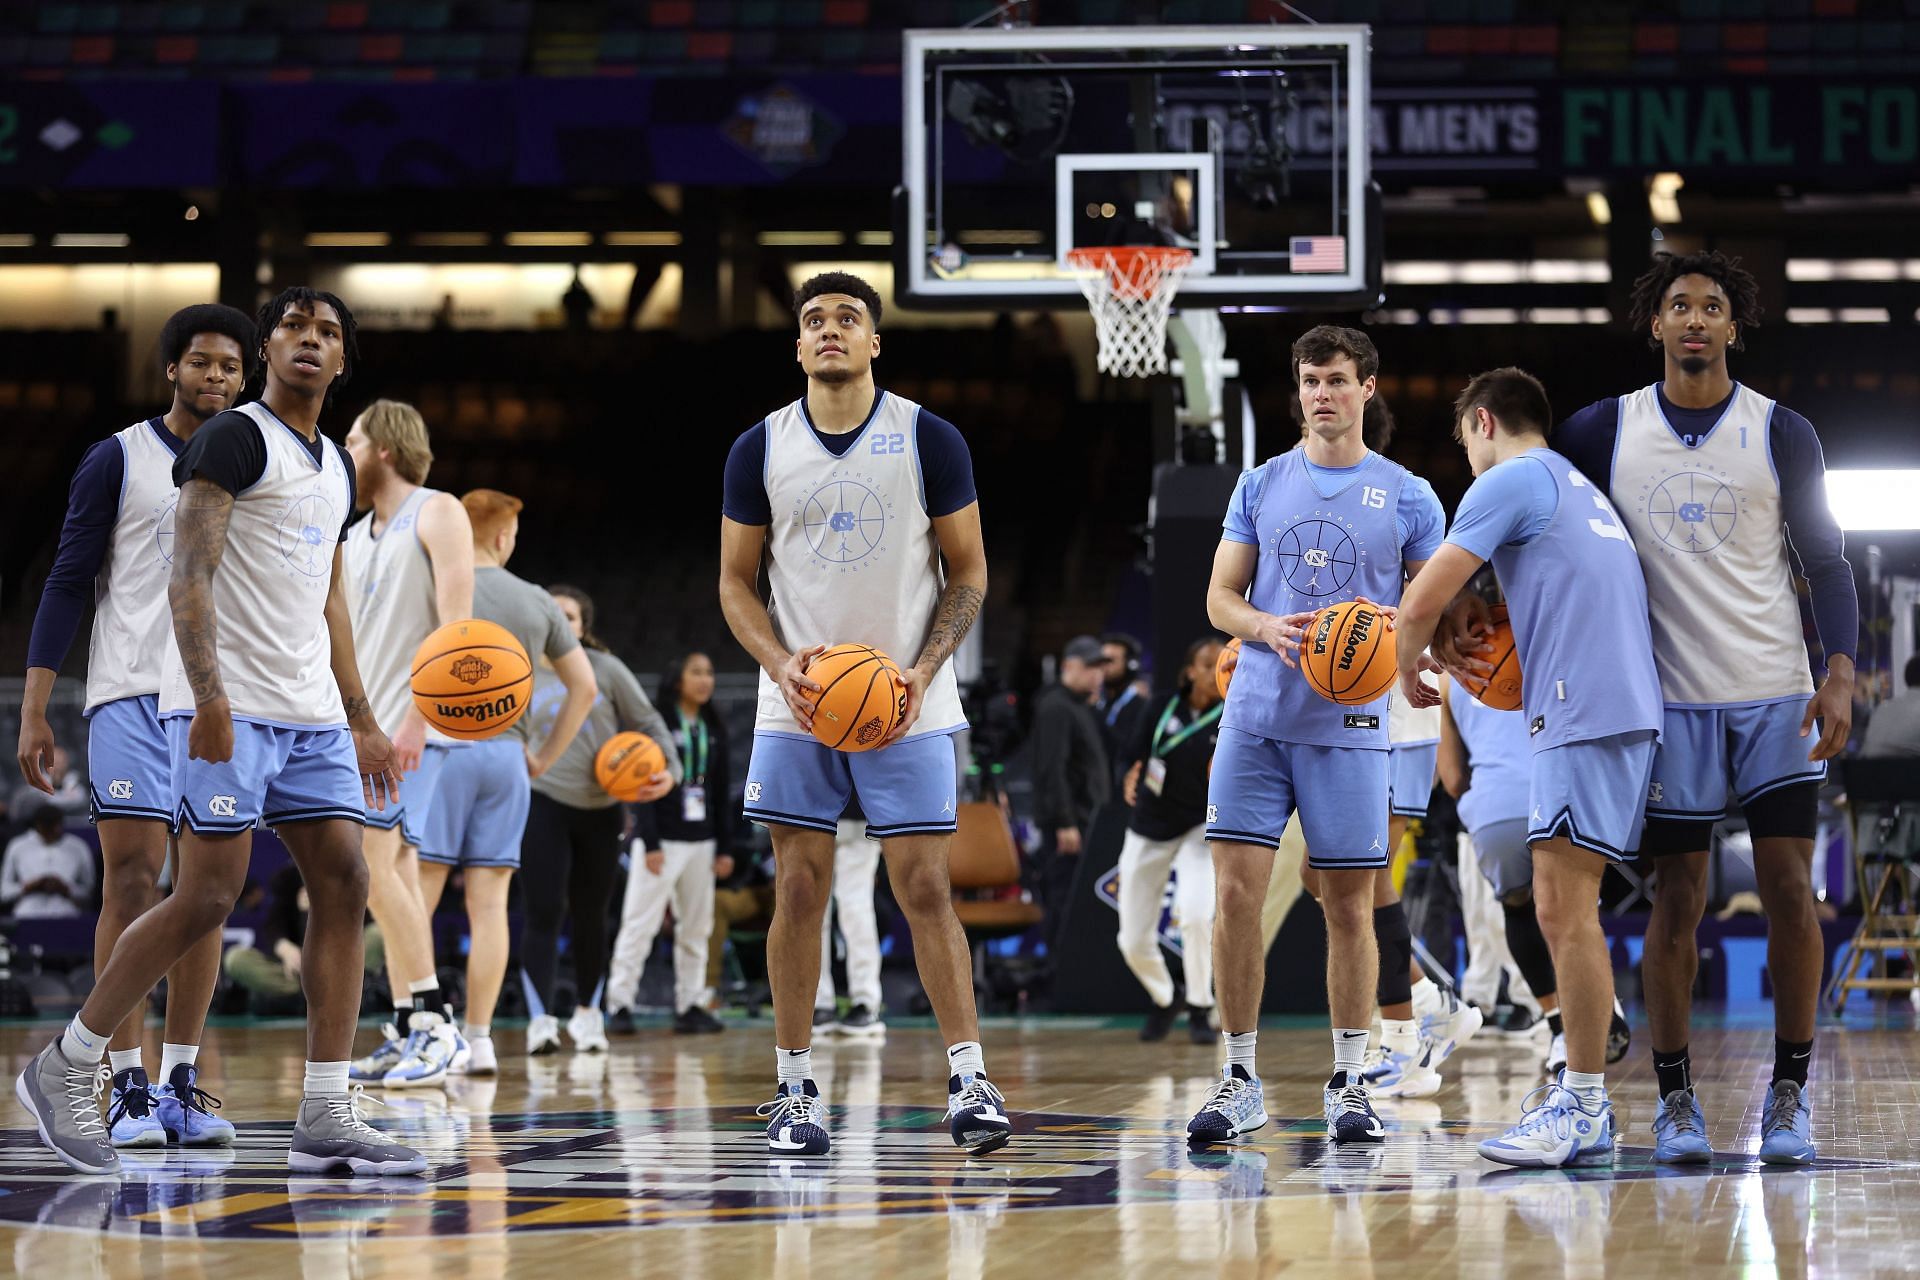 The North Carolina Tar Heels will try to continue to shock the world.